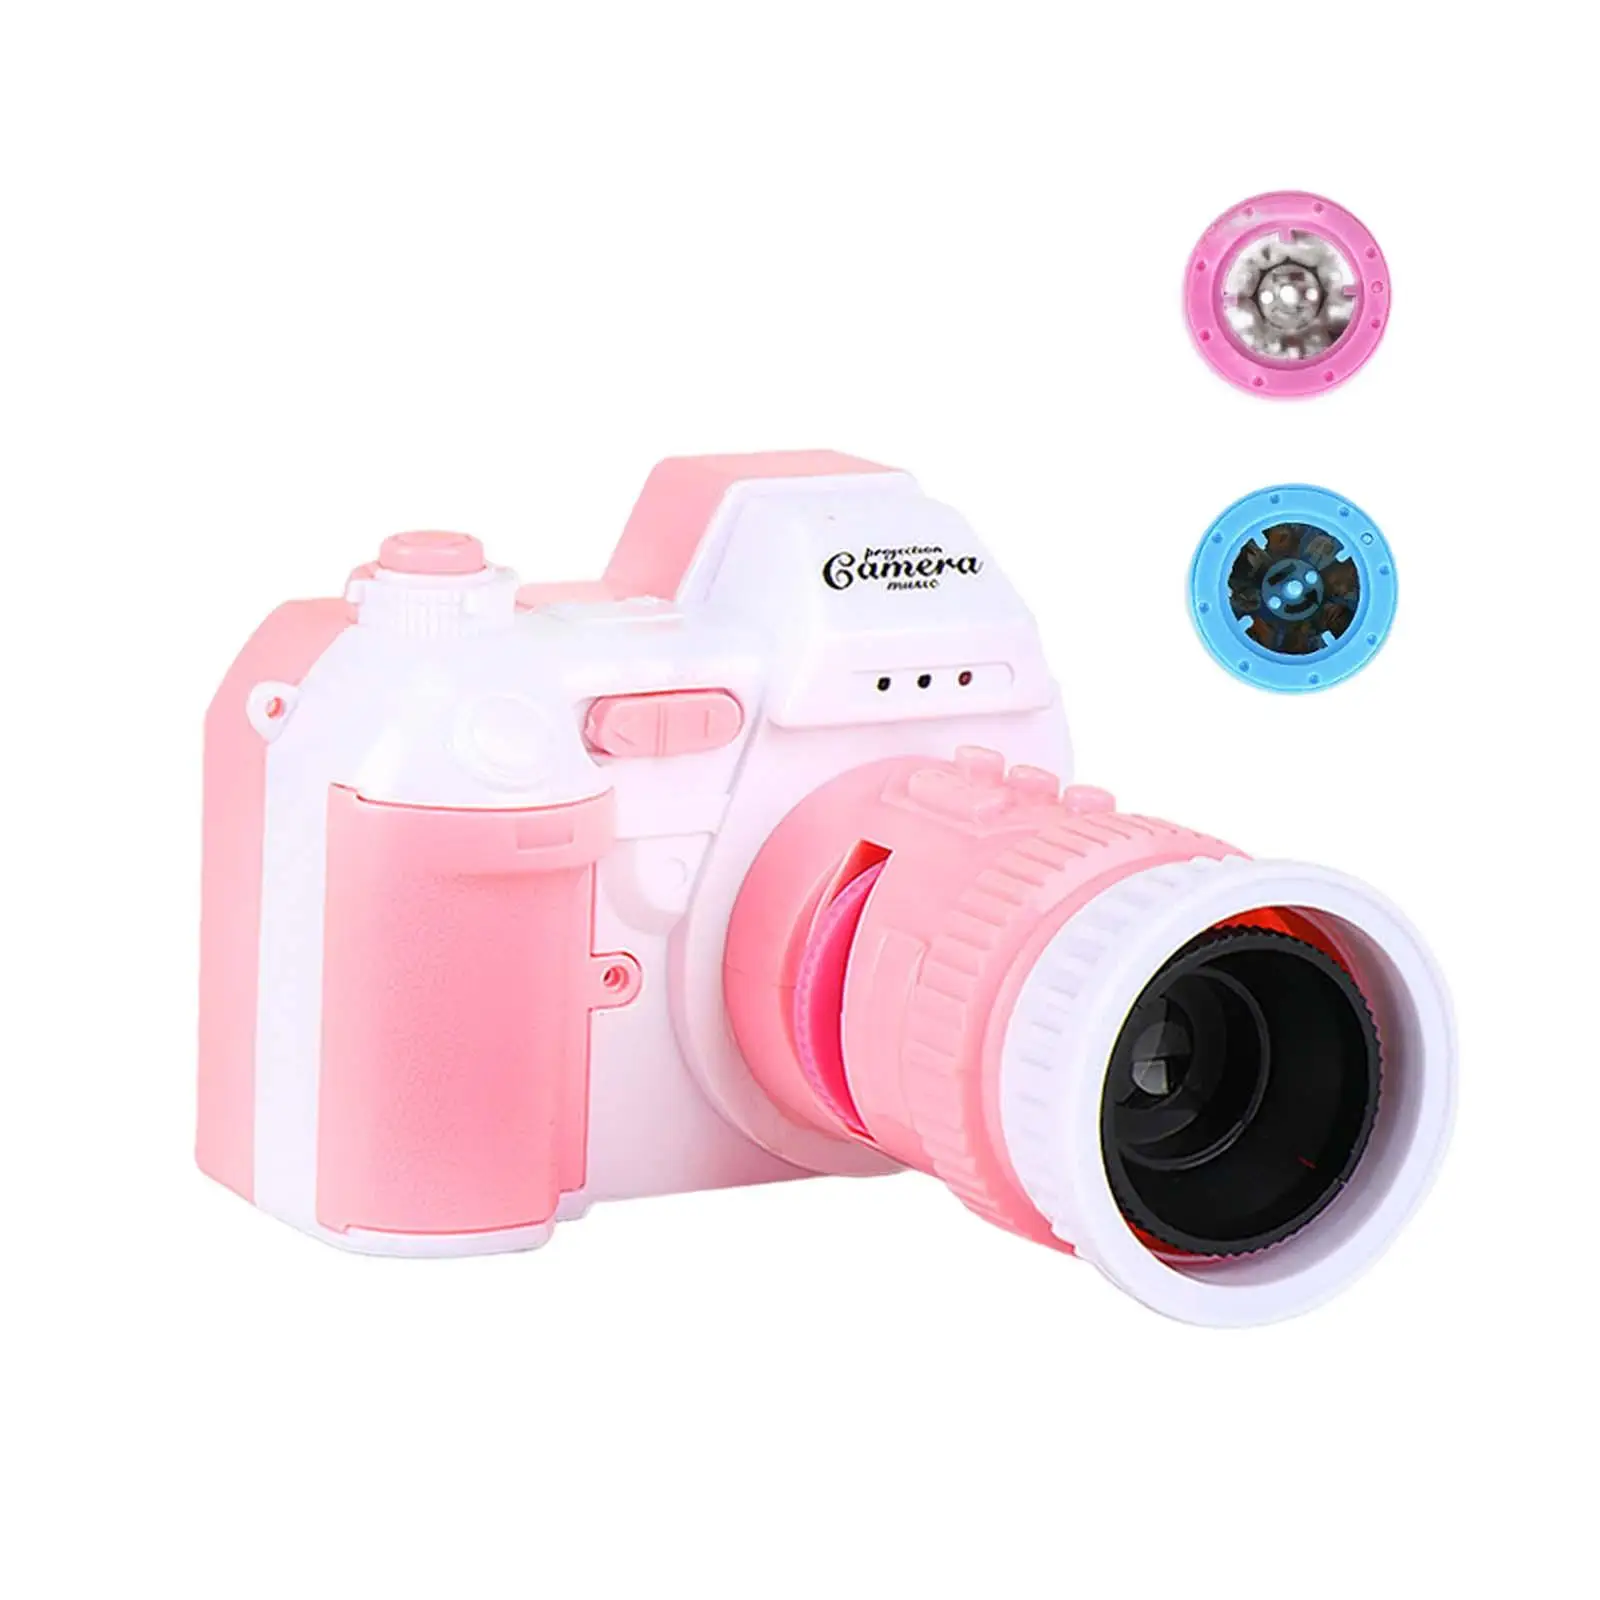 Portable Projection Camera Toy with Lights and Music for Children Day Age 3+